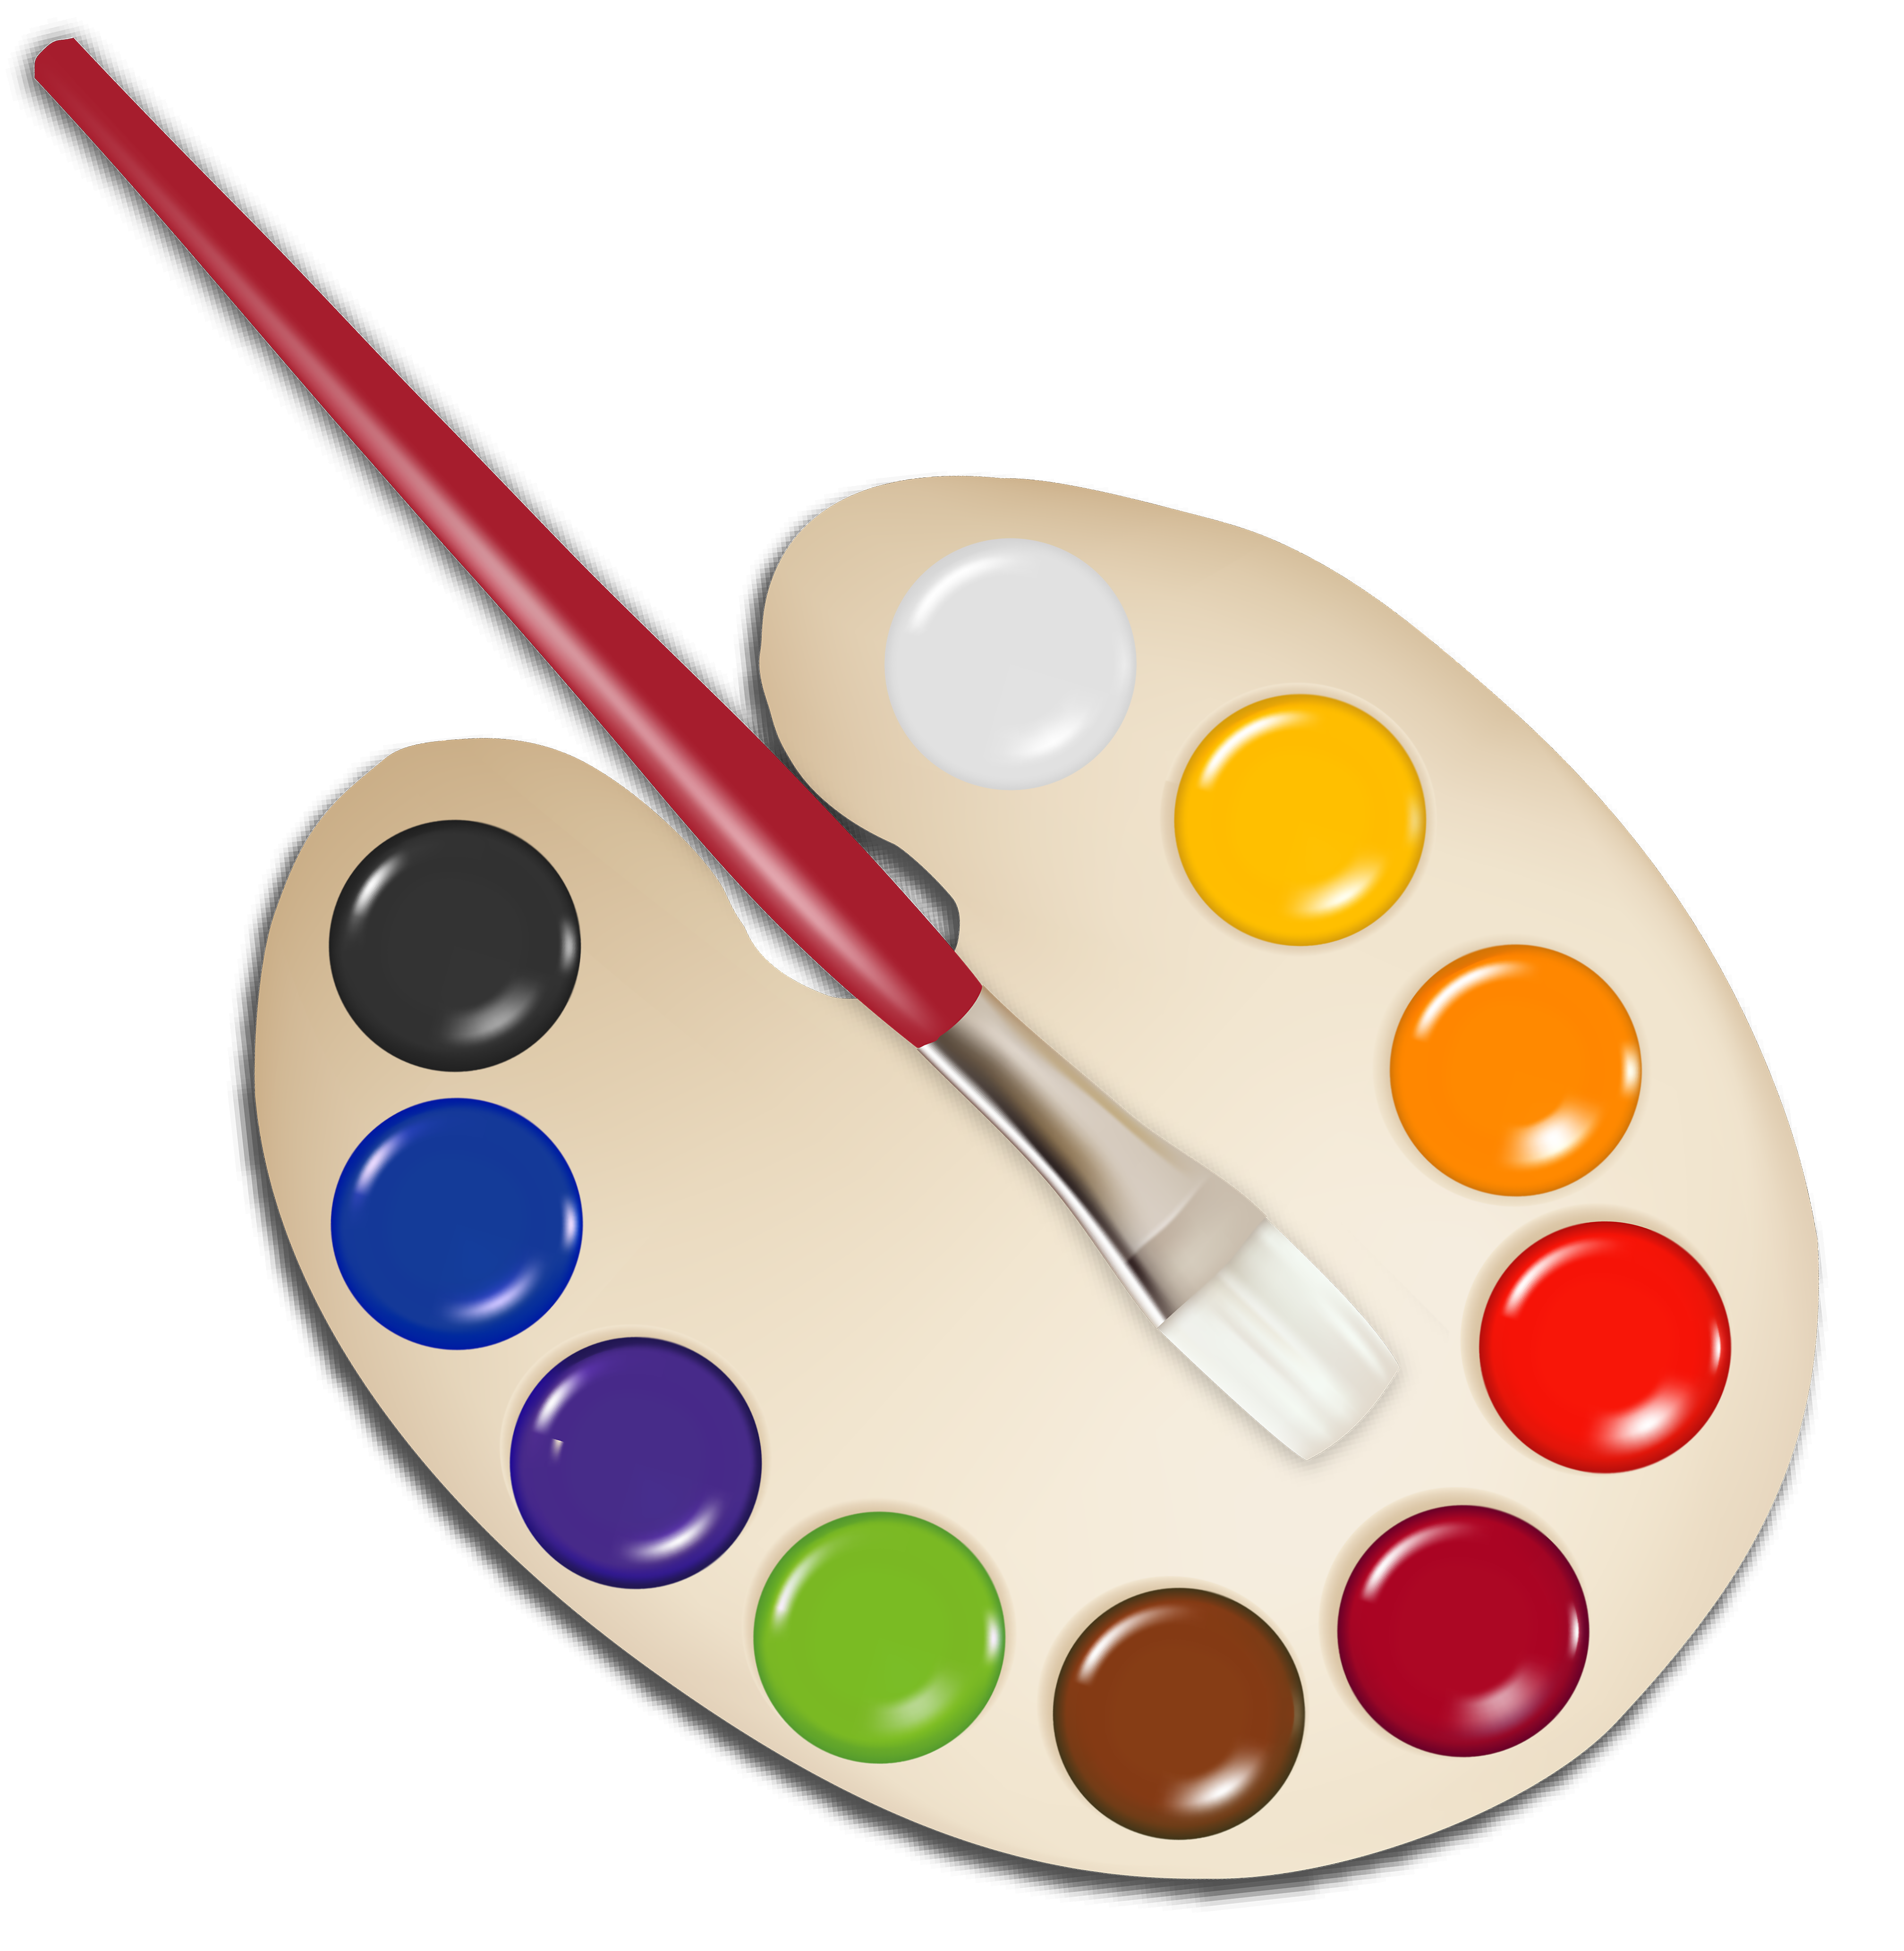 Palette with Paint Brush PNG Image.